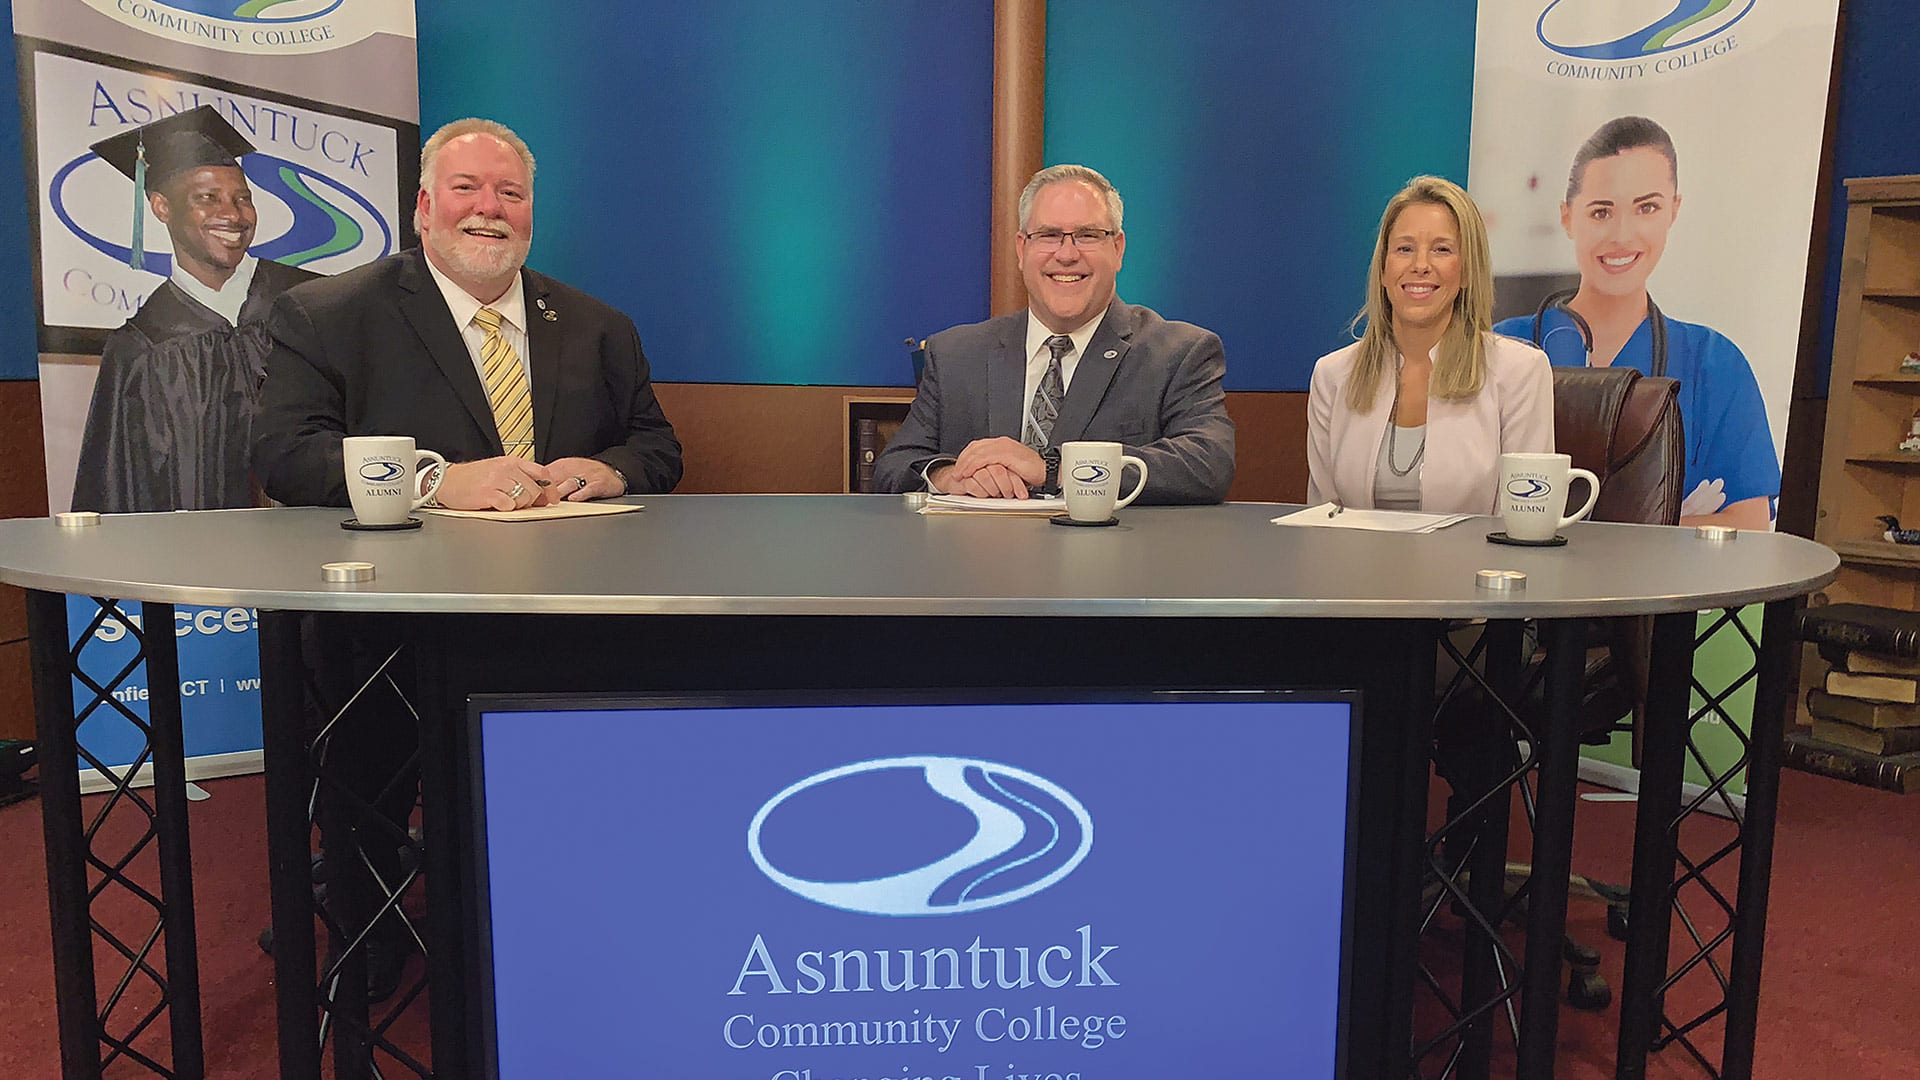 Asnuntuck Community College’s November episode of Changing Lives focuses on recent growth at the college